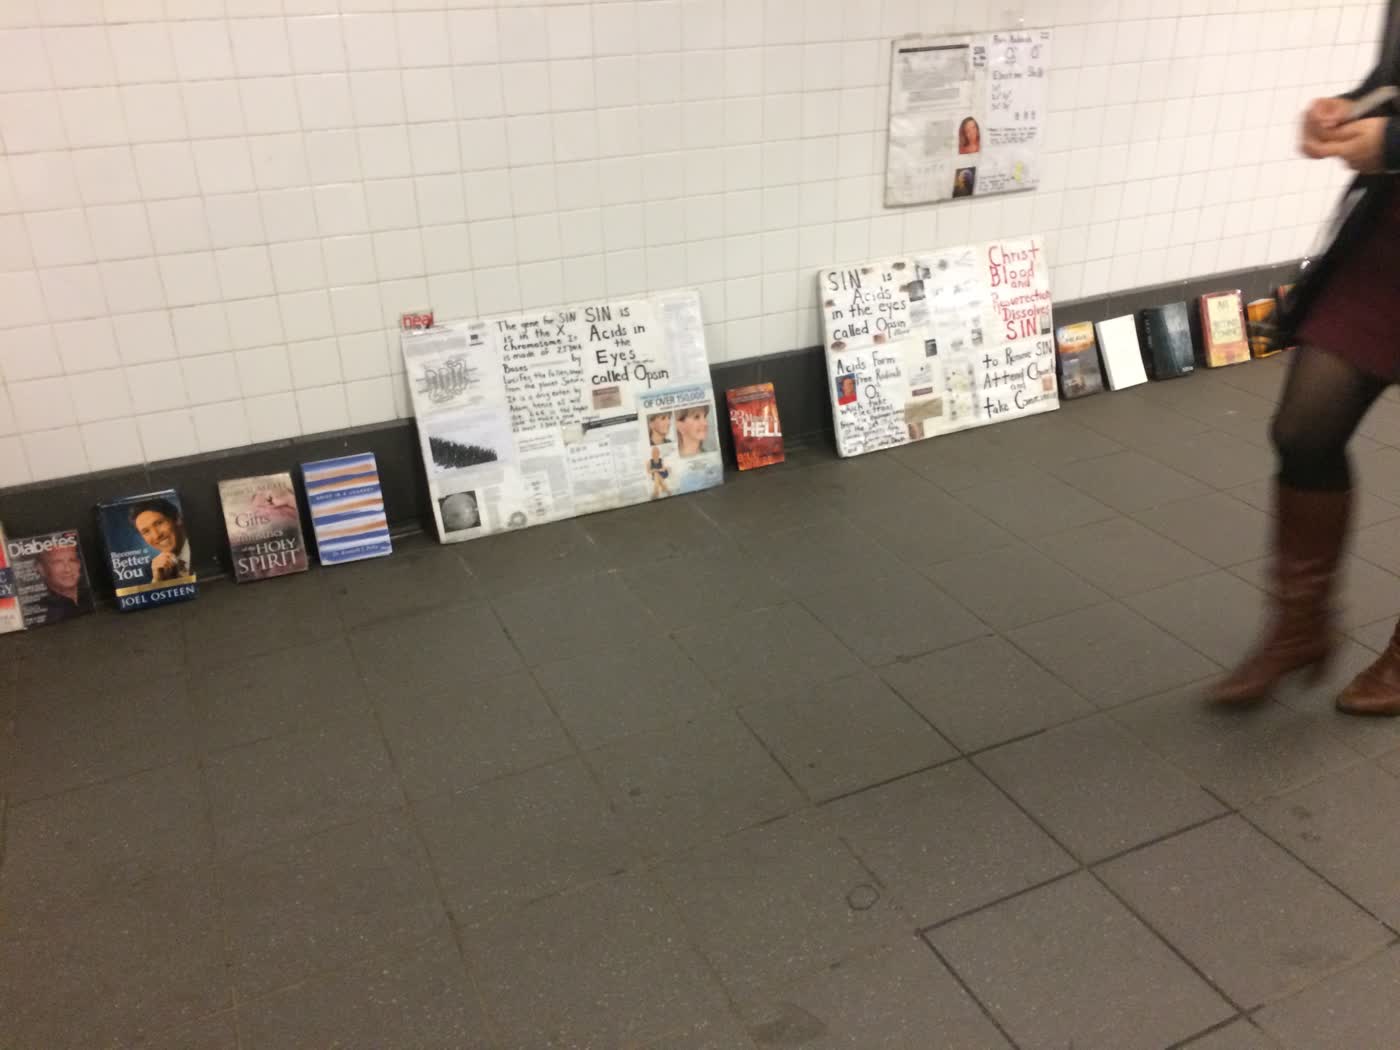 A bunch of signs and books resting up against a wall in the NYC subway.